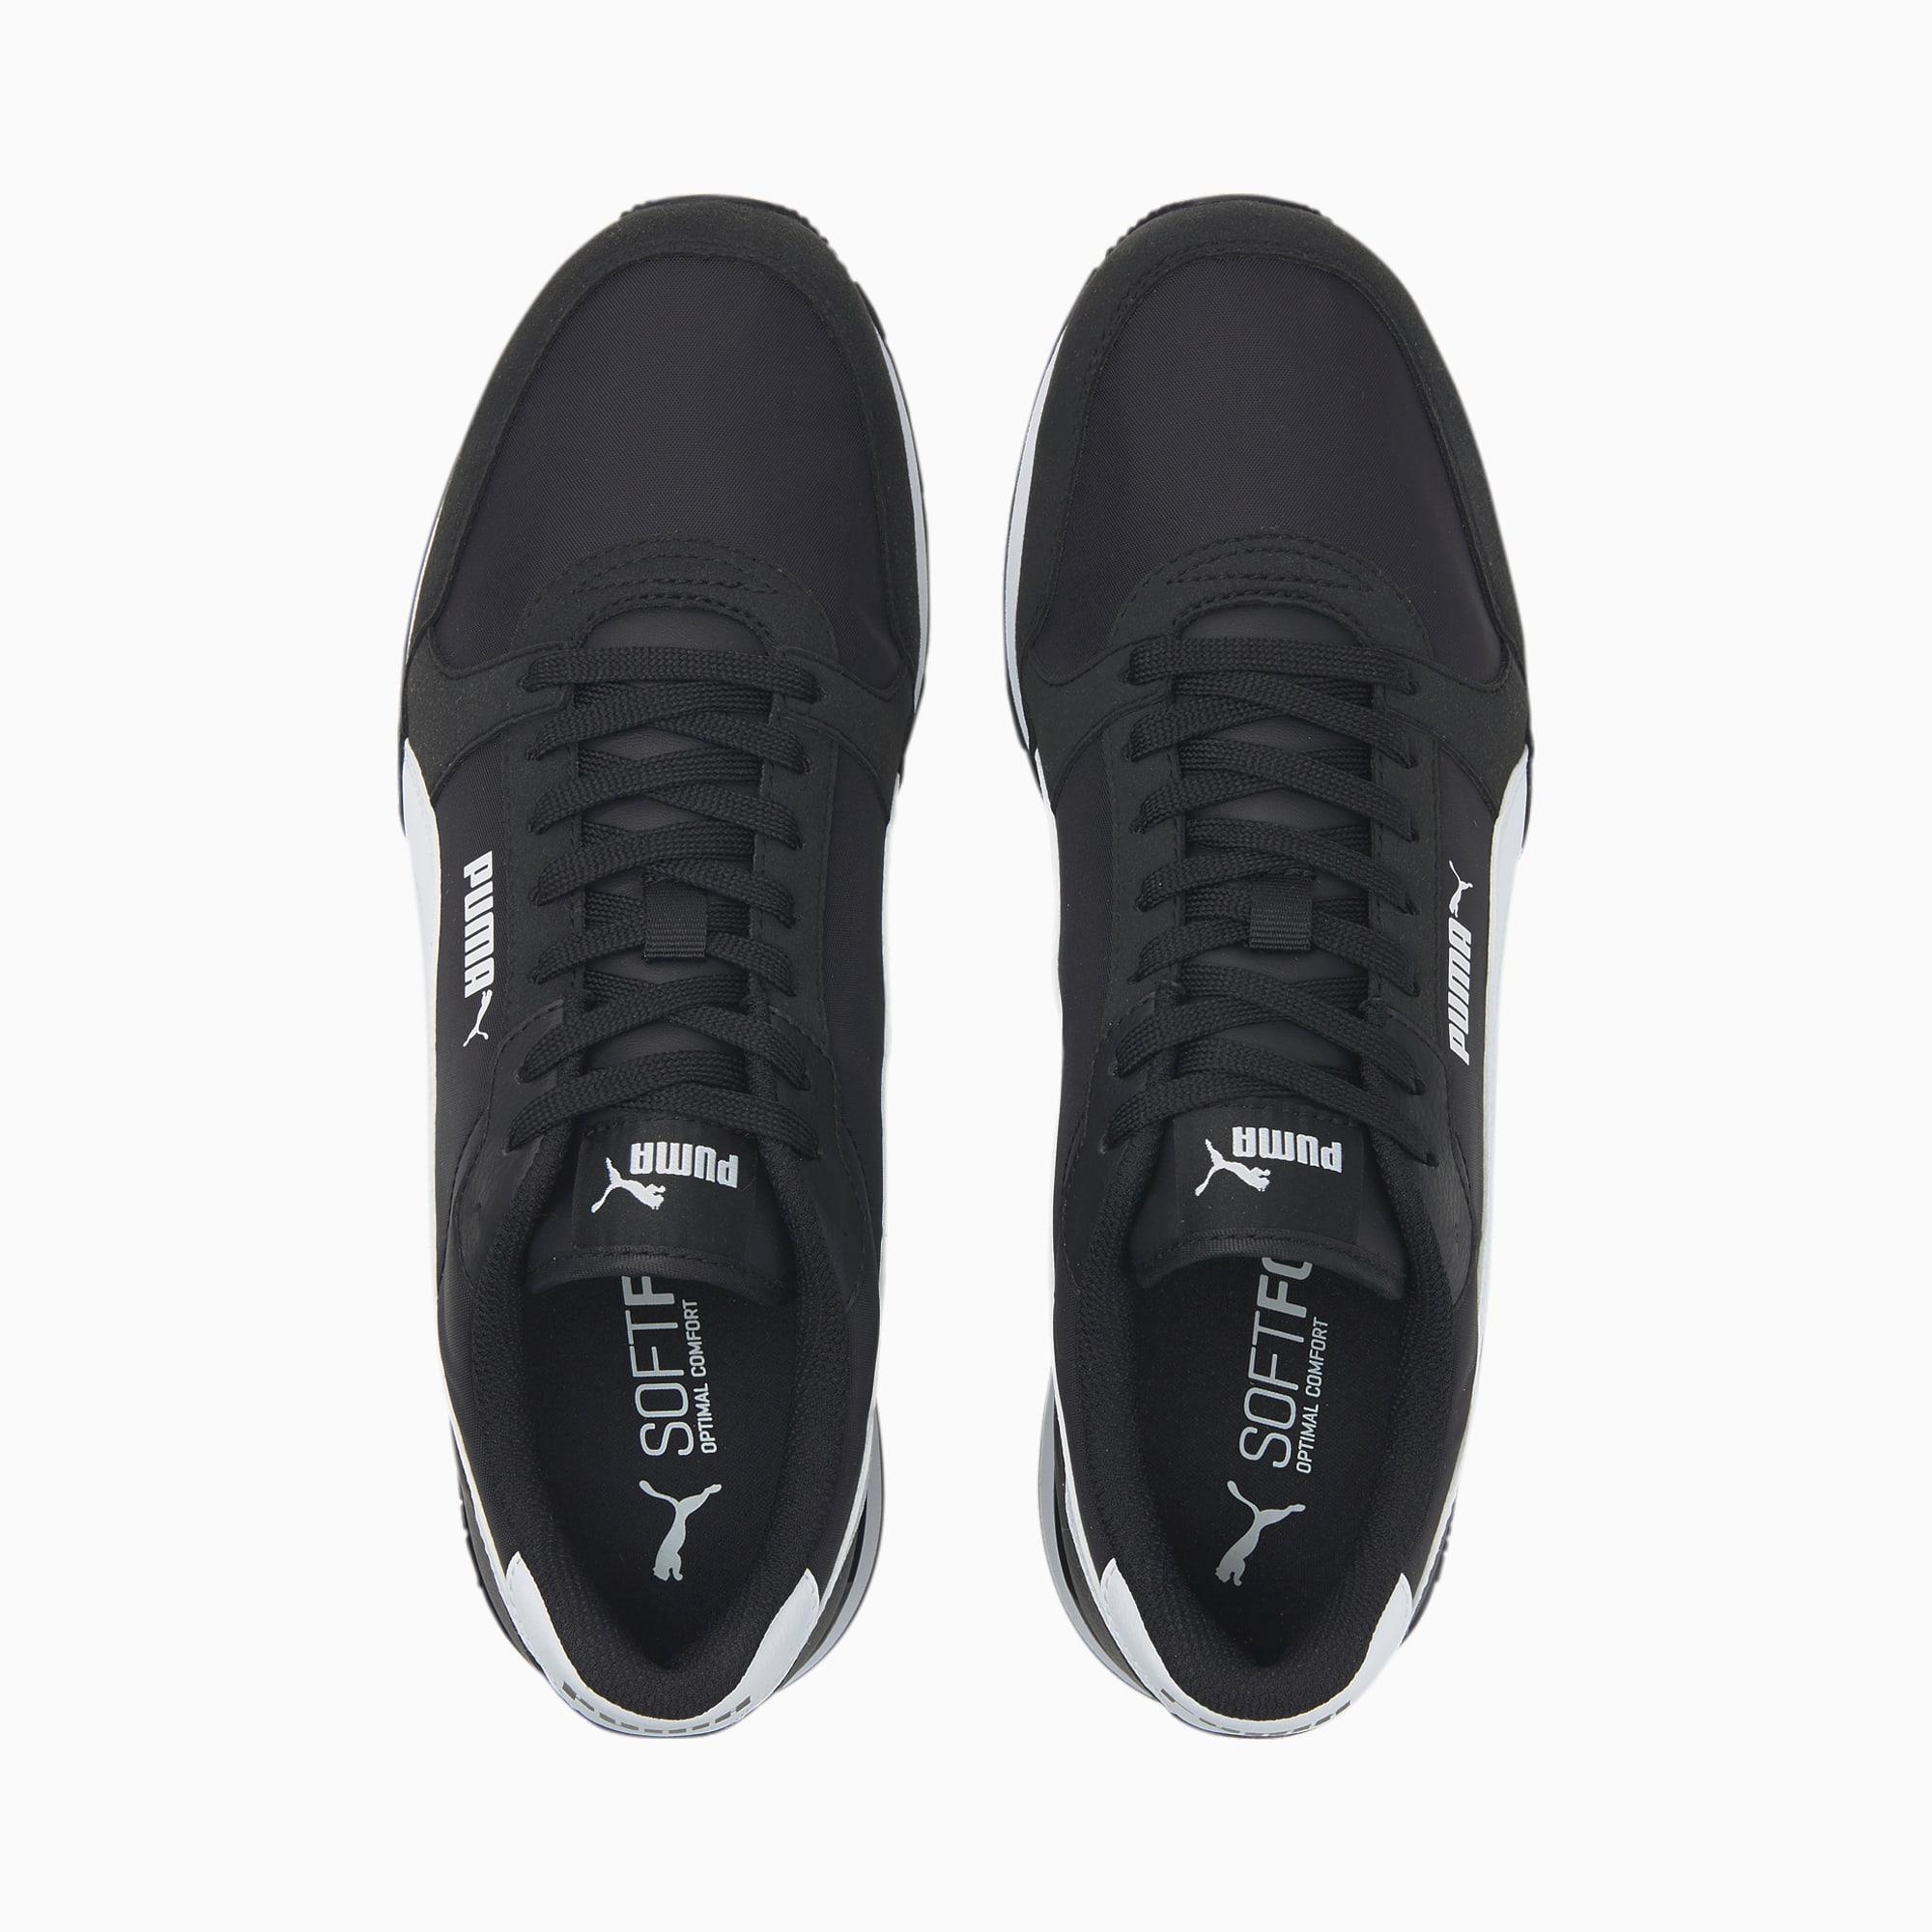 Puma Mens St Runner V3 NL Lace Up Sneakers Black 10 Casual